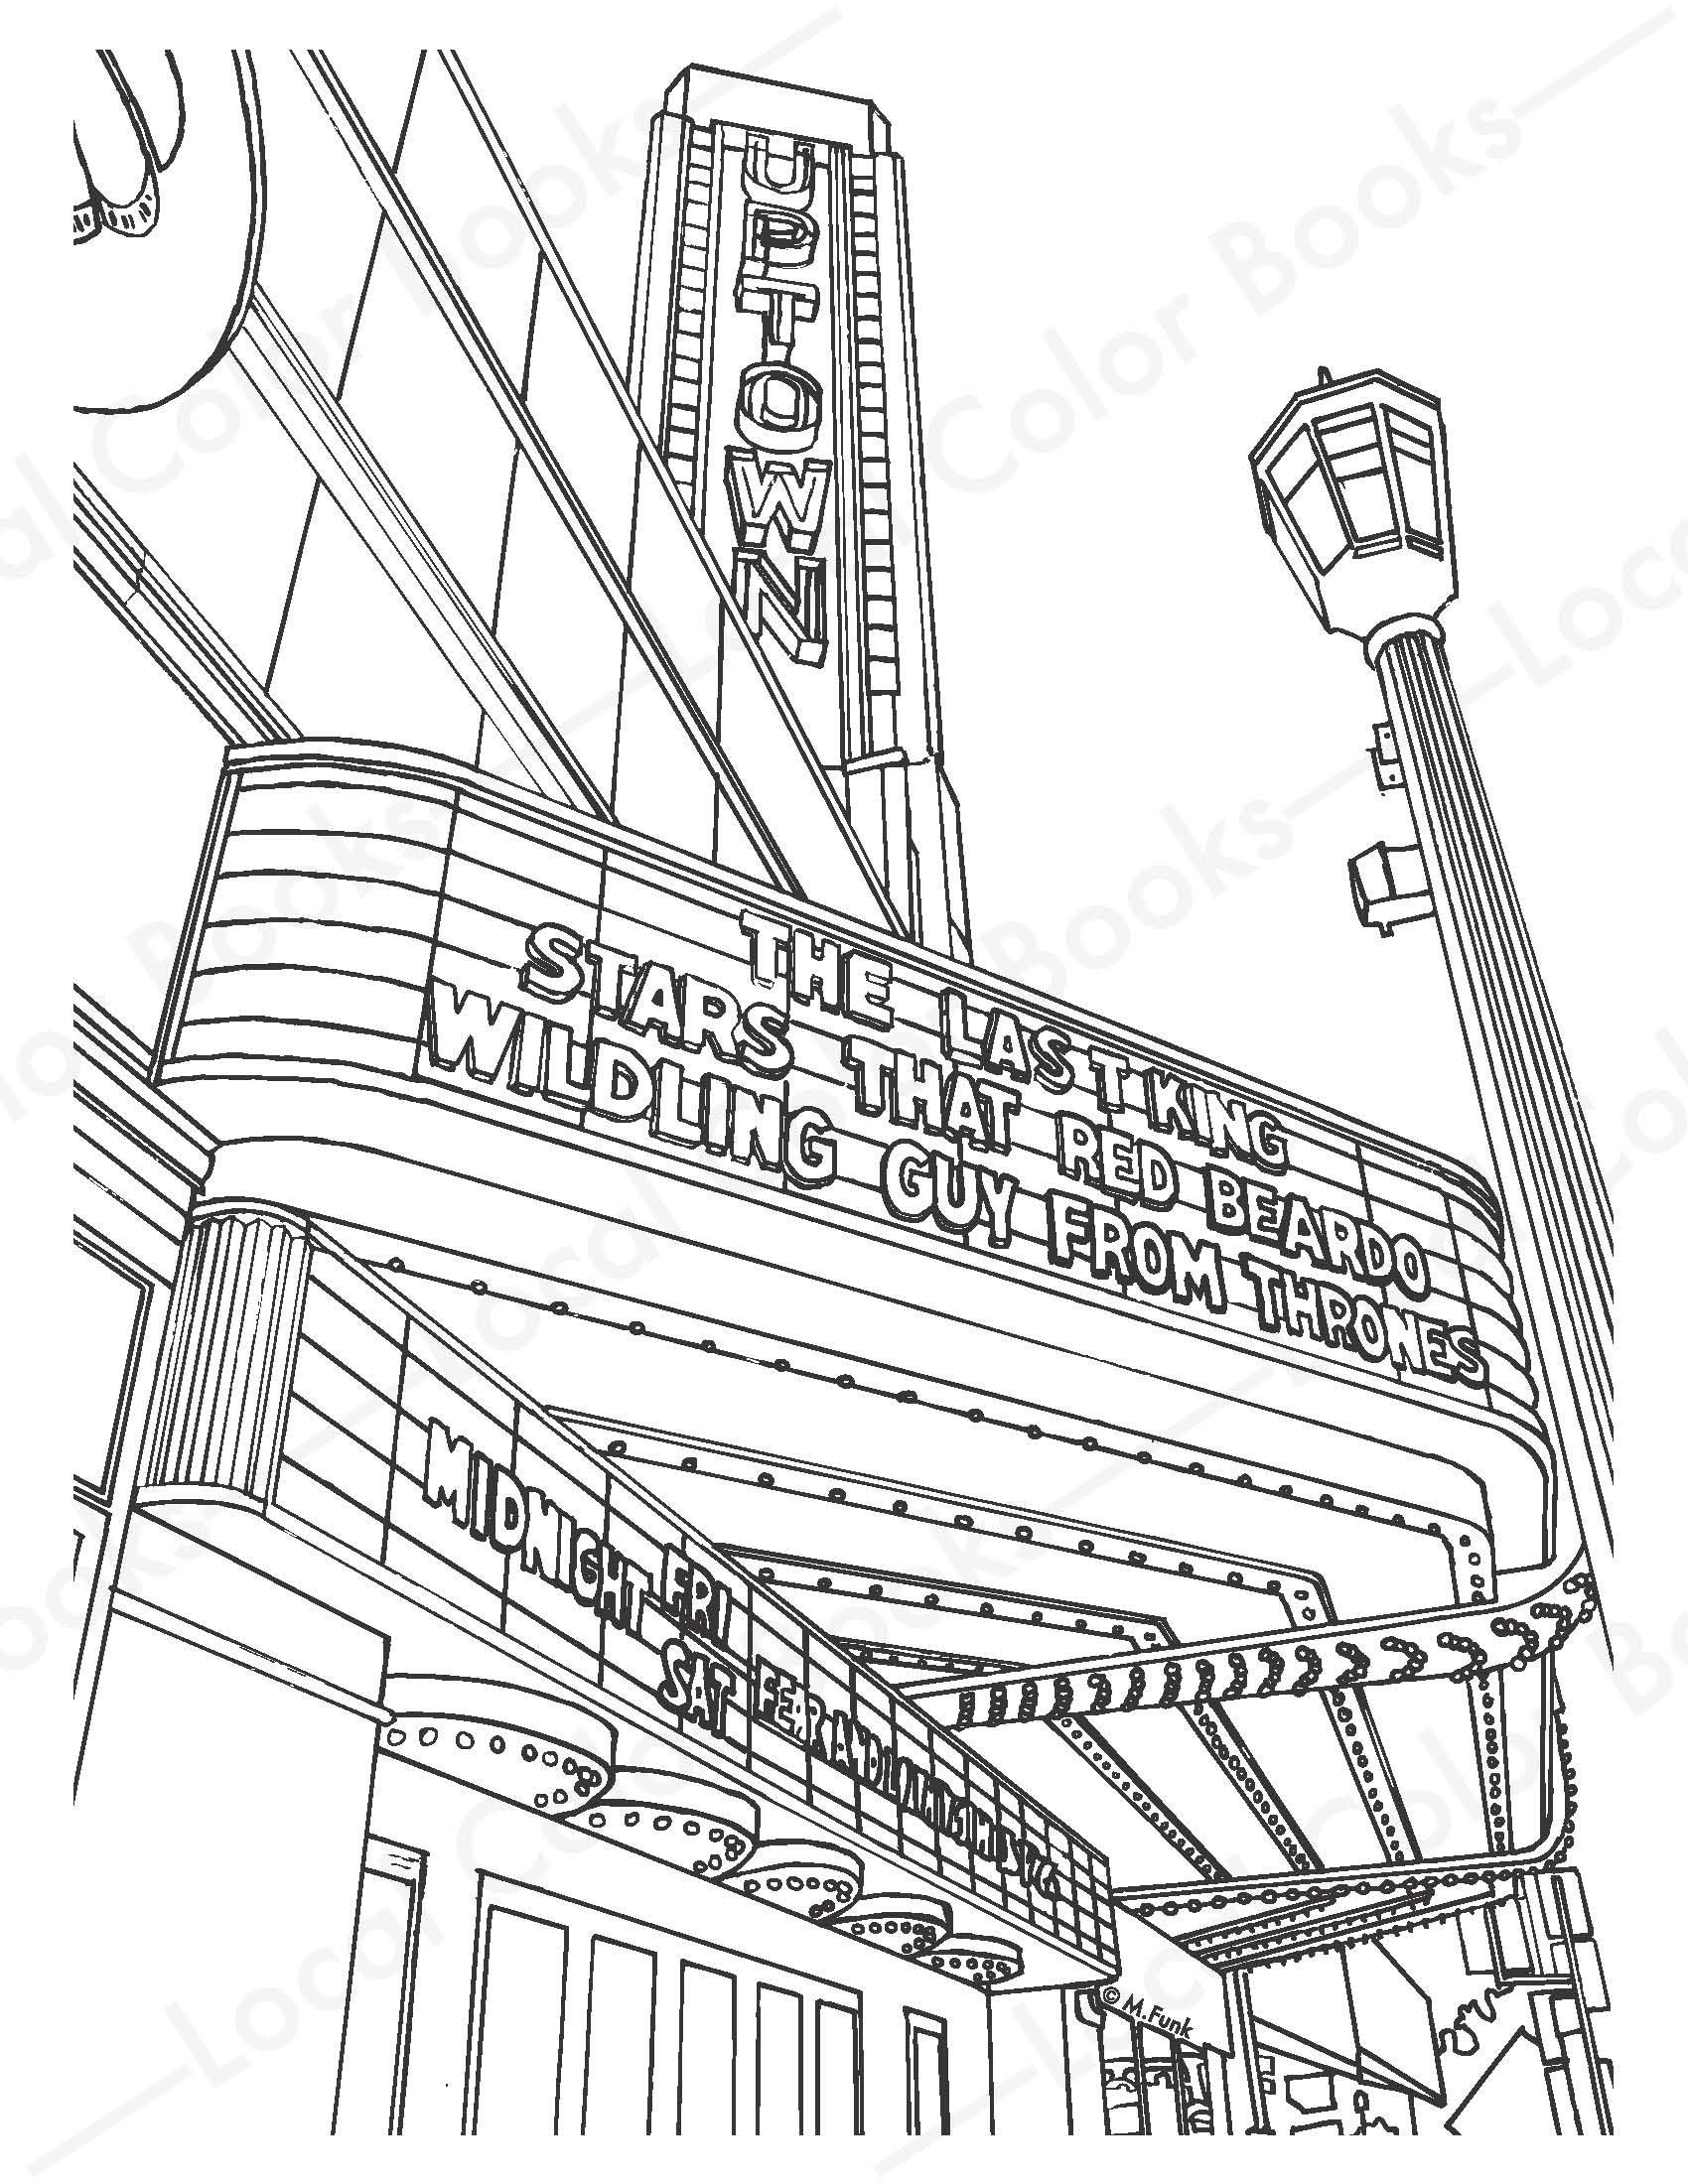 Uptown theatre color minneapolis printable instant digital download adult coloring page